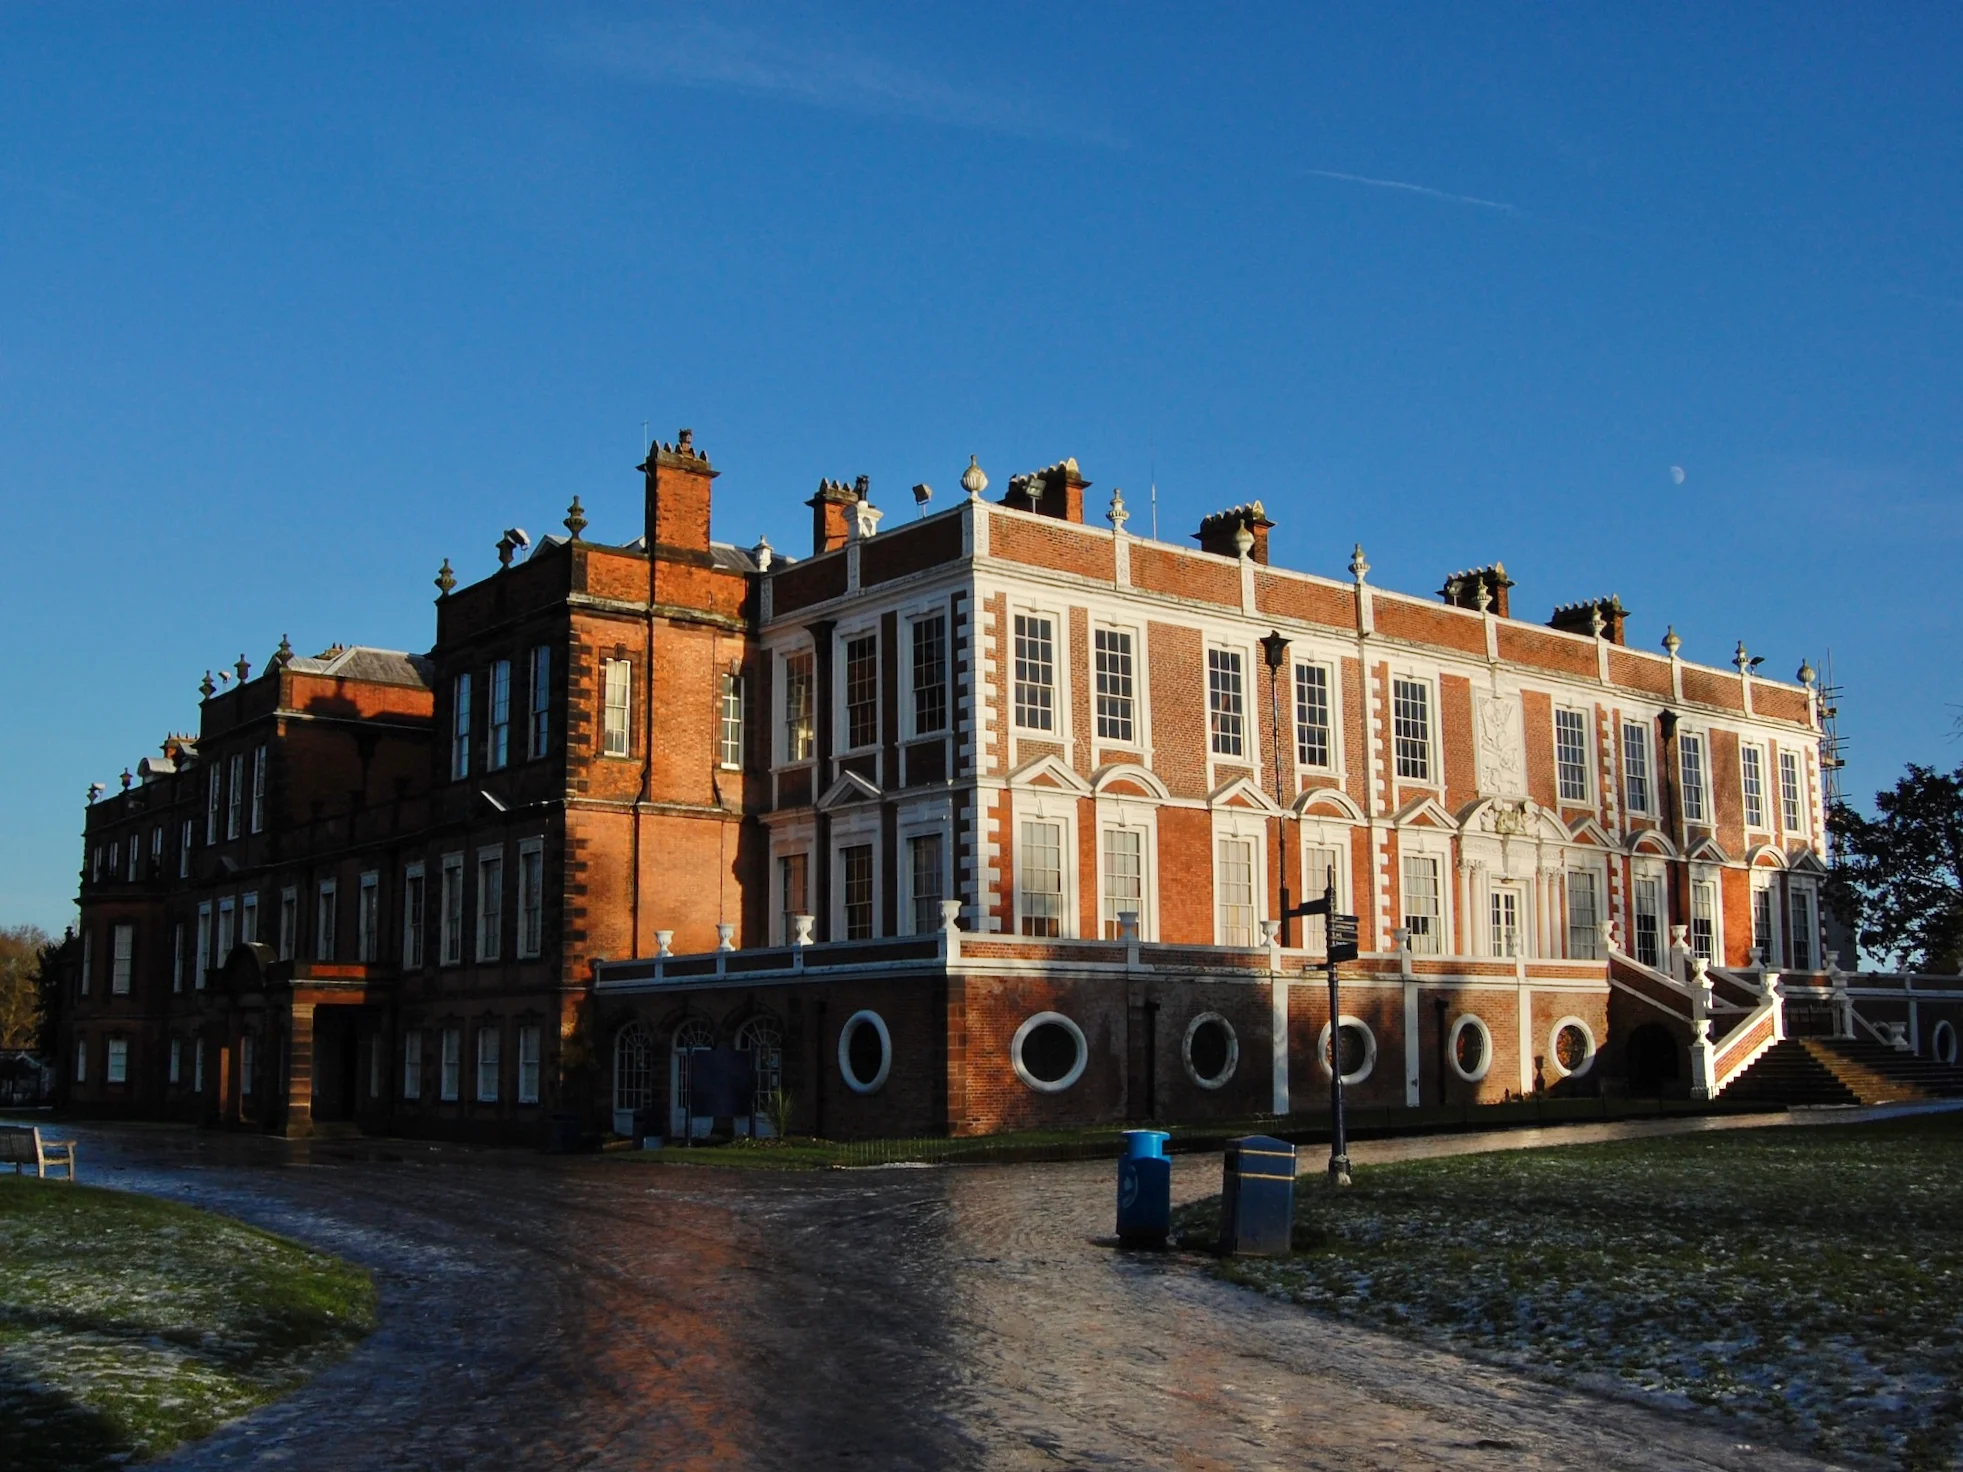 Photograph of Croxteth Hall in the frost under a blue sky